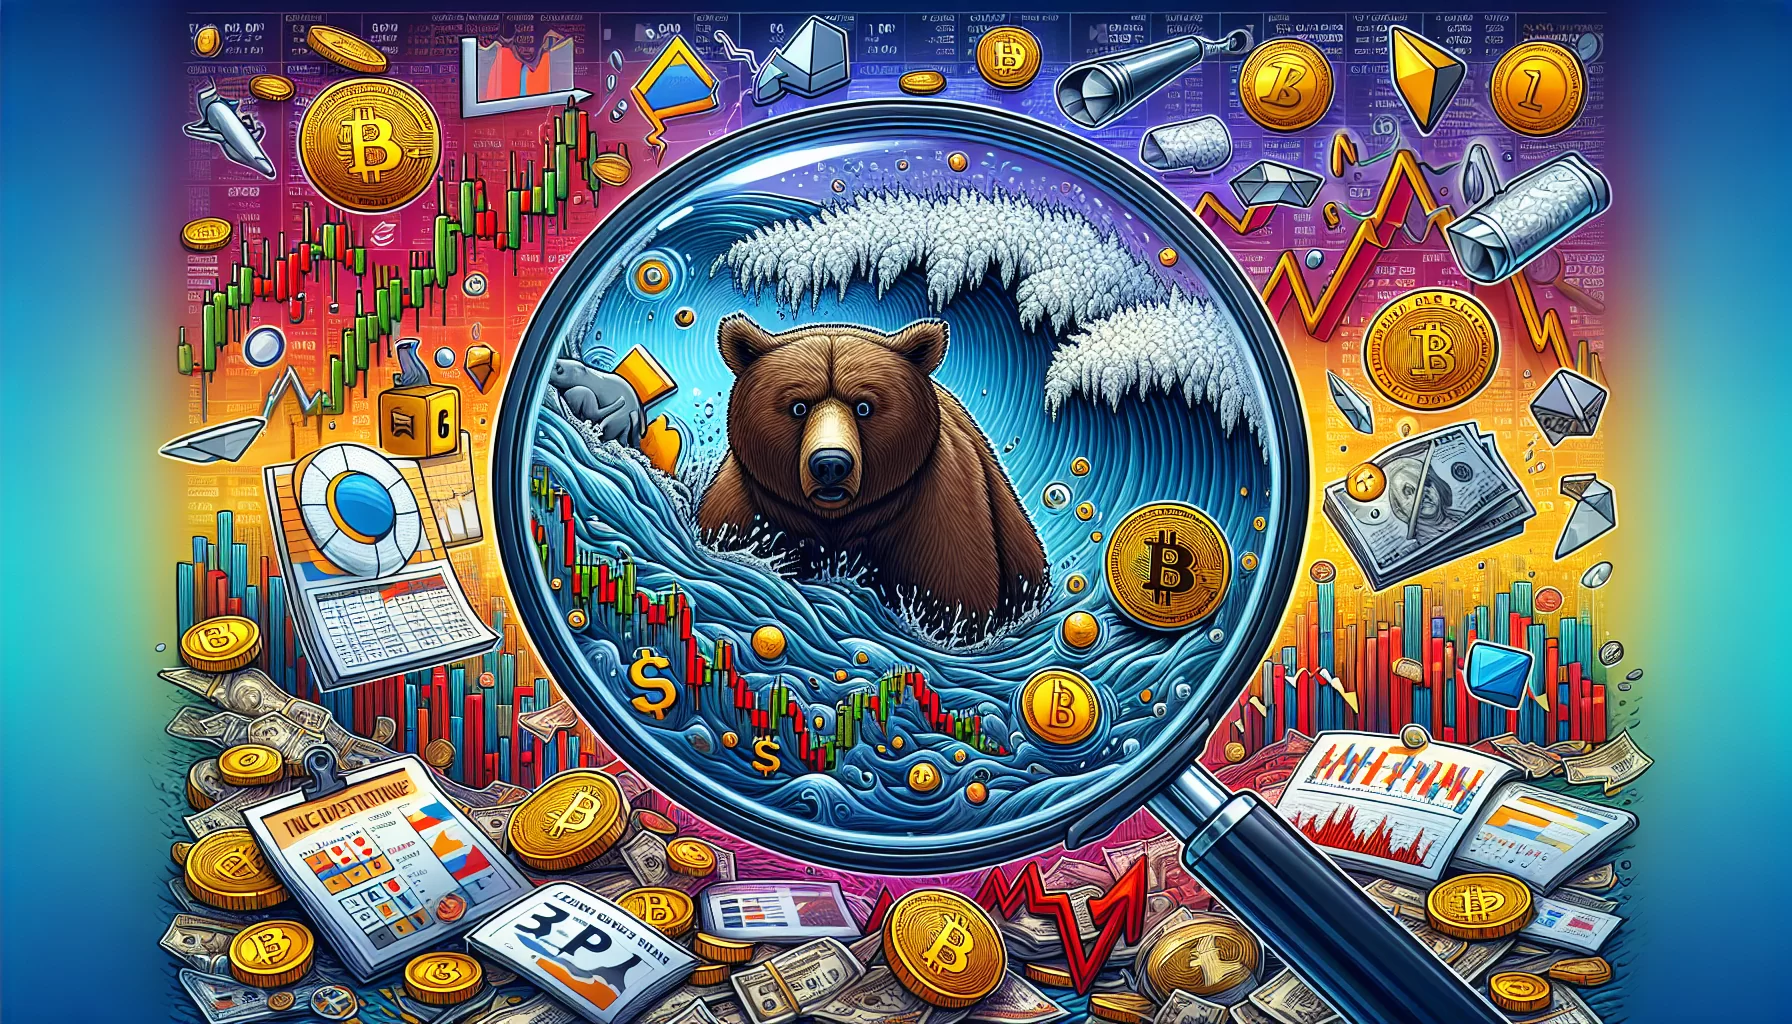 Decoding the factors behind current crypto market downturn